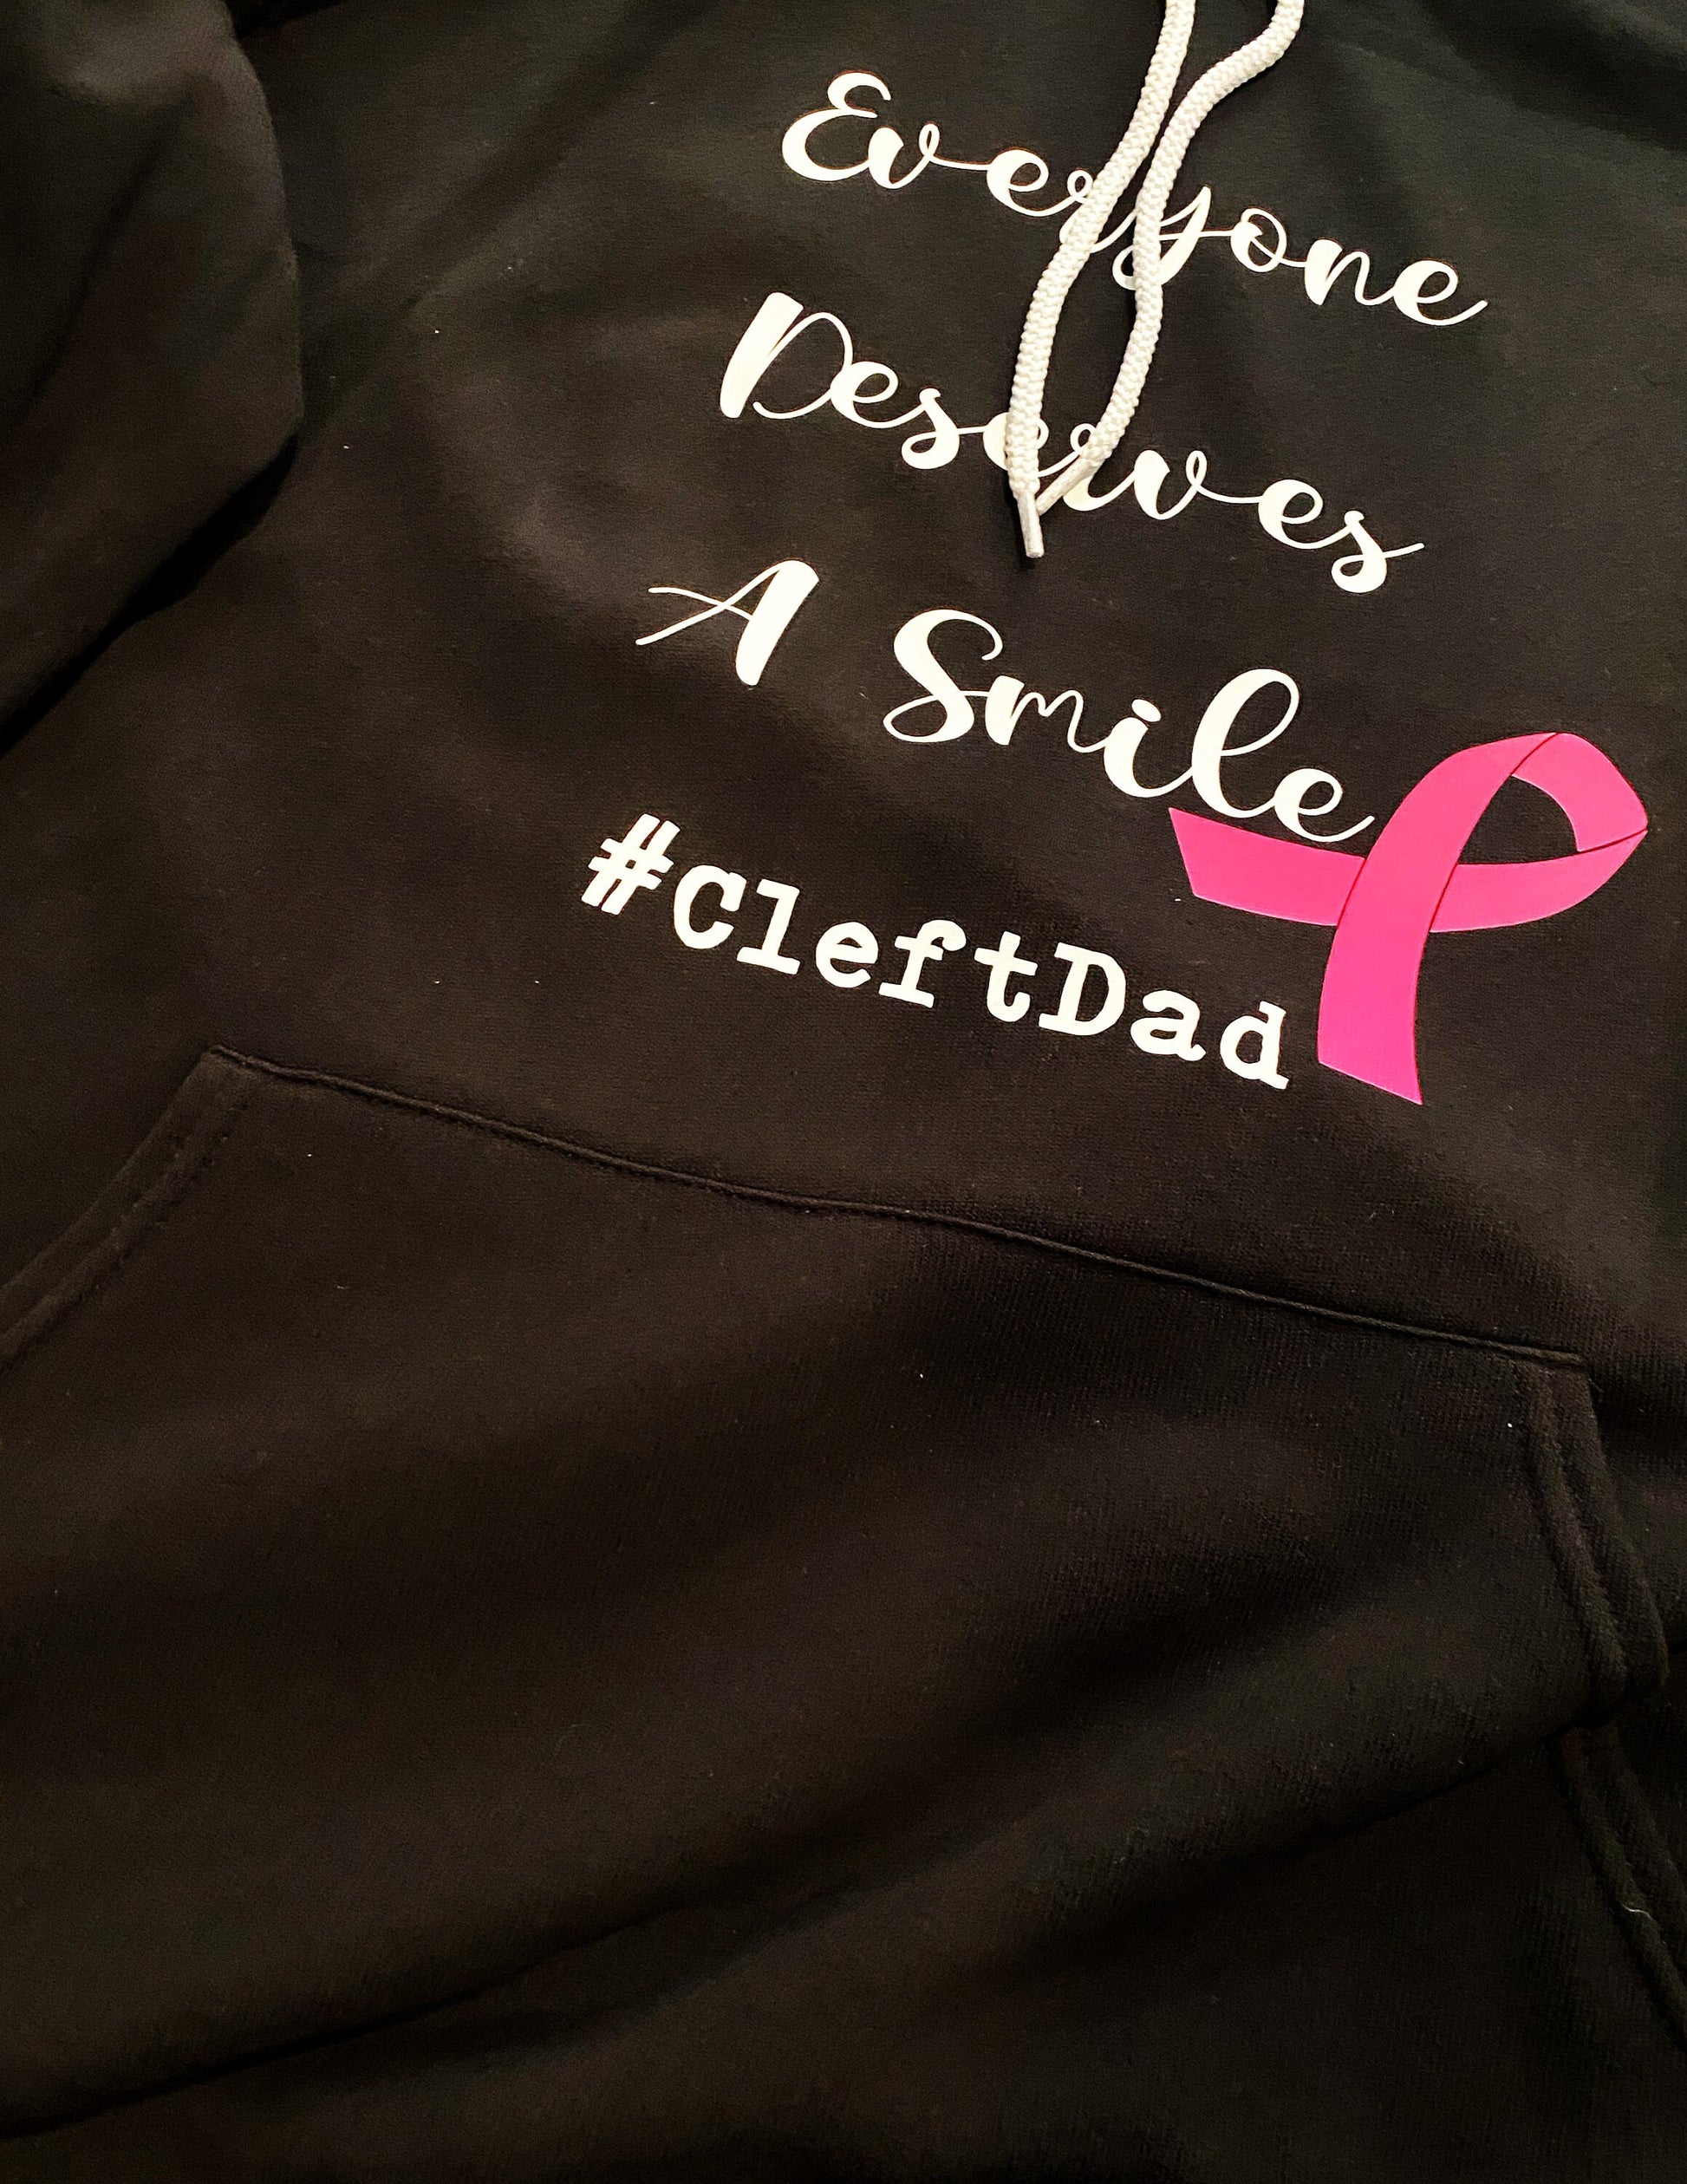 Cleft Palate Awareness Hoodie, T-shirt, Tank, or Tote